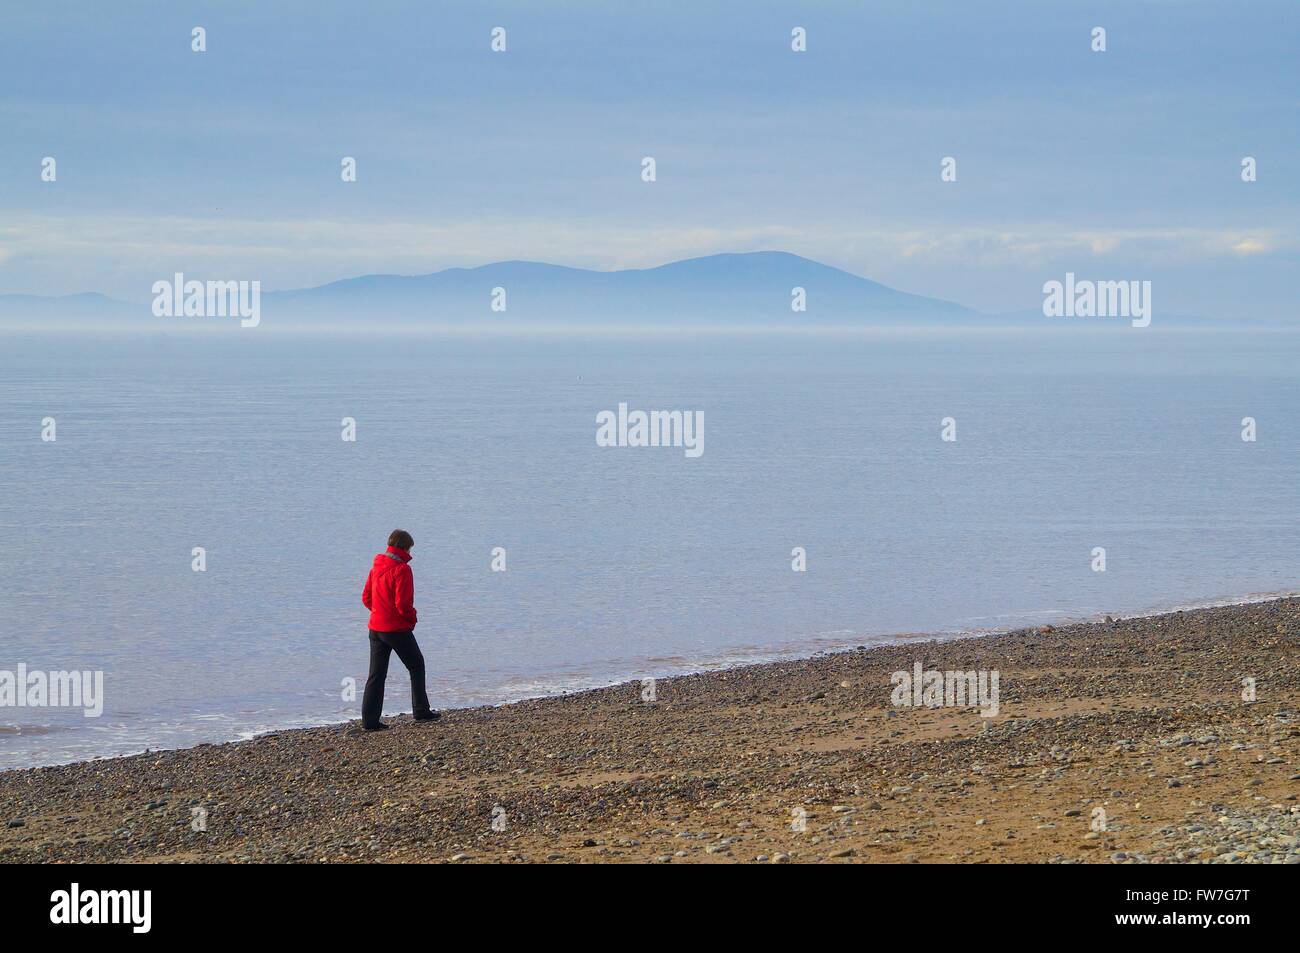 Lonely Woman walking on beach avec Criffel à distance. Allonby, Cumbria, Angleterre, Royaume-Uni, Europe. Banque D'Images